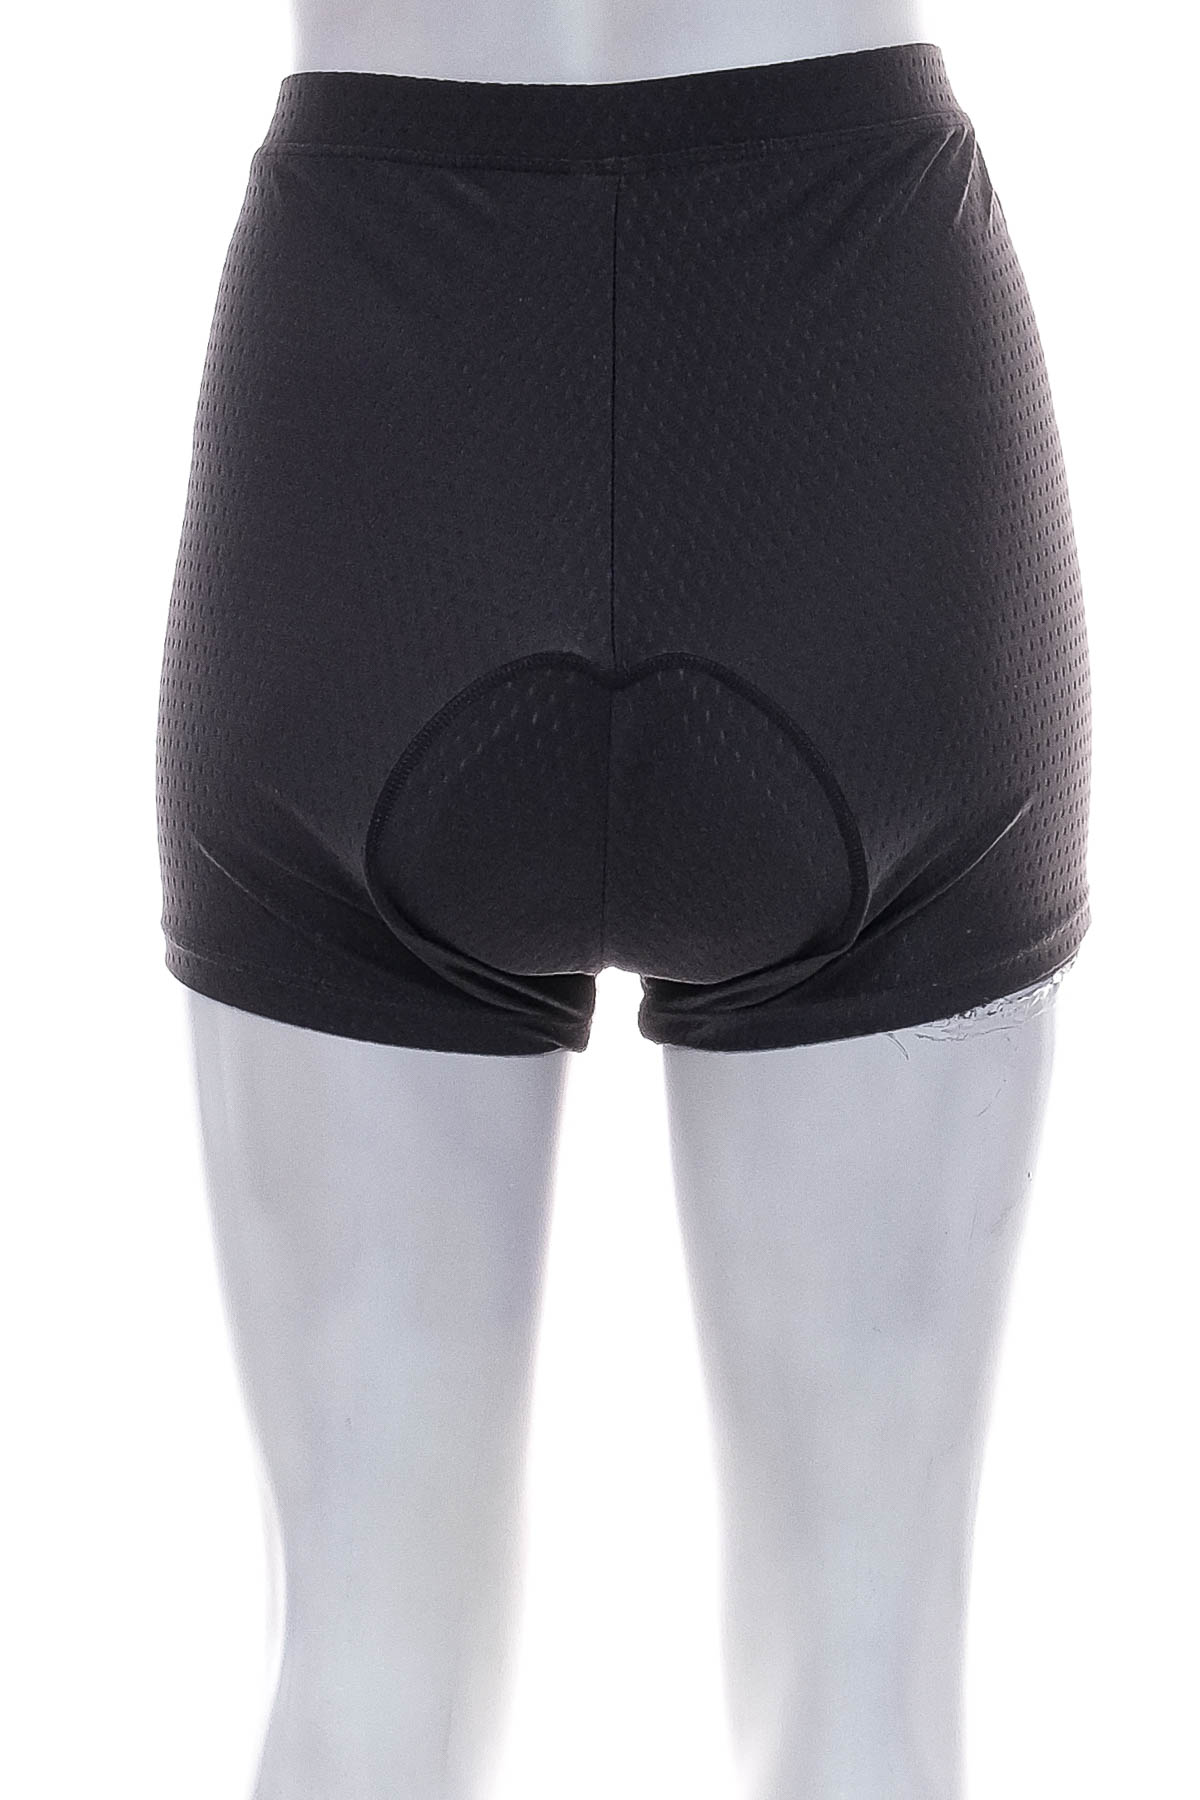 Women's cycling tights - SOUKESPORTS - 1